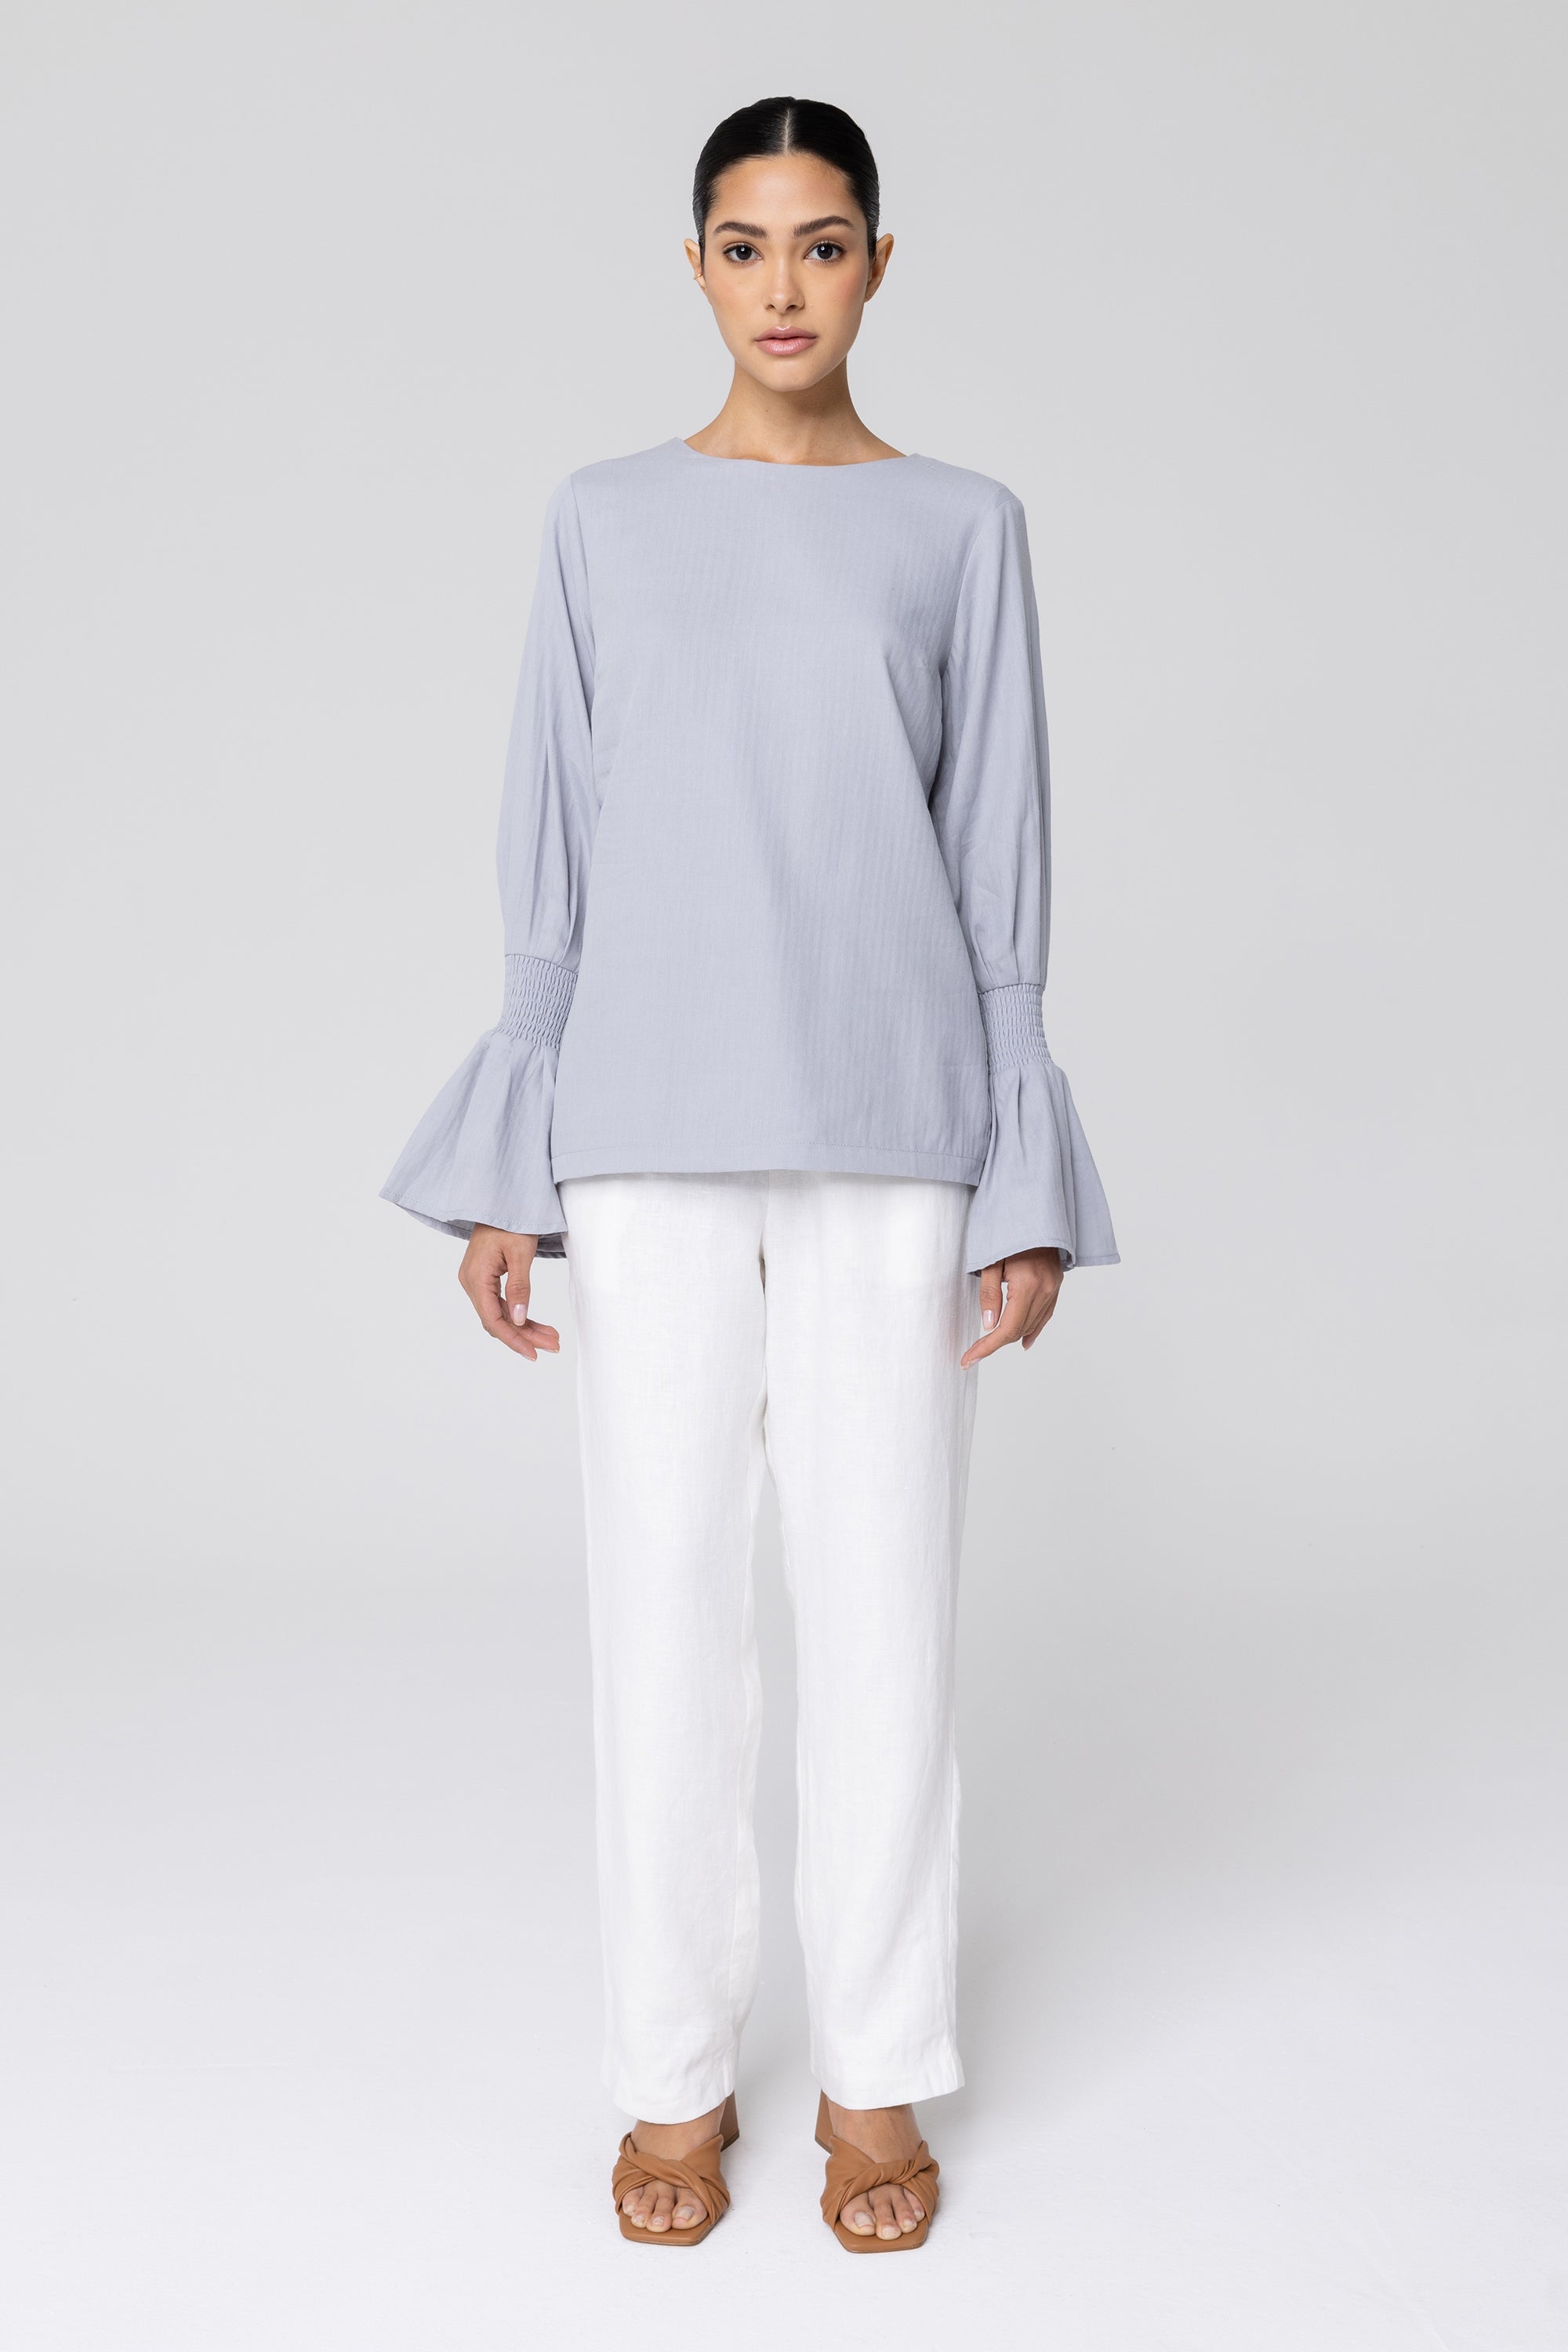 Bea Bell Sleeve Top - Powder Blue (Grey) Veiled Collection 